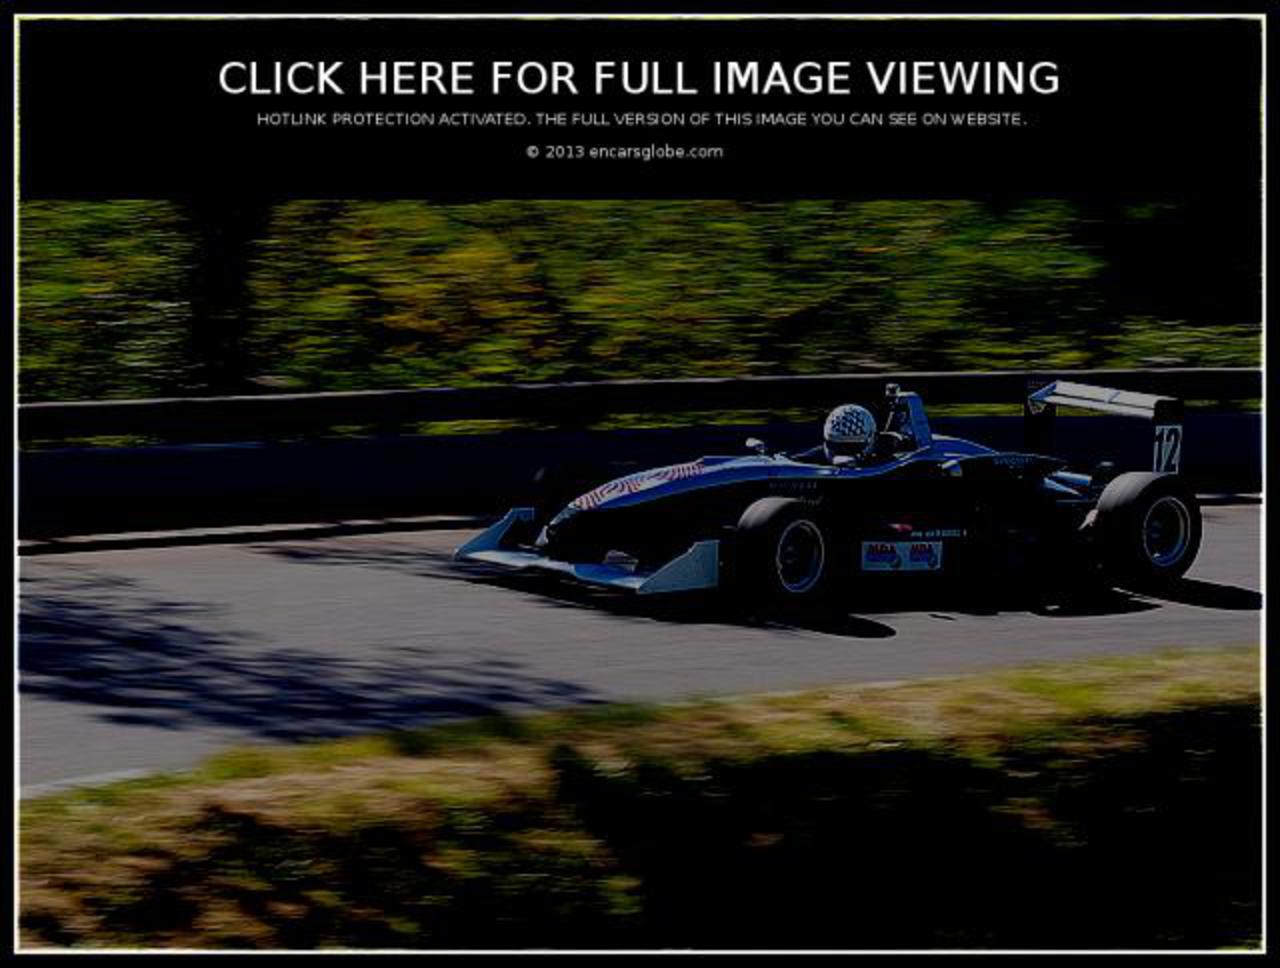 Dallara F399: Photo gallery, complete information about model ...